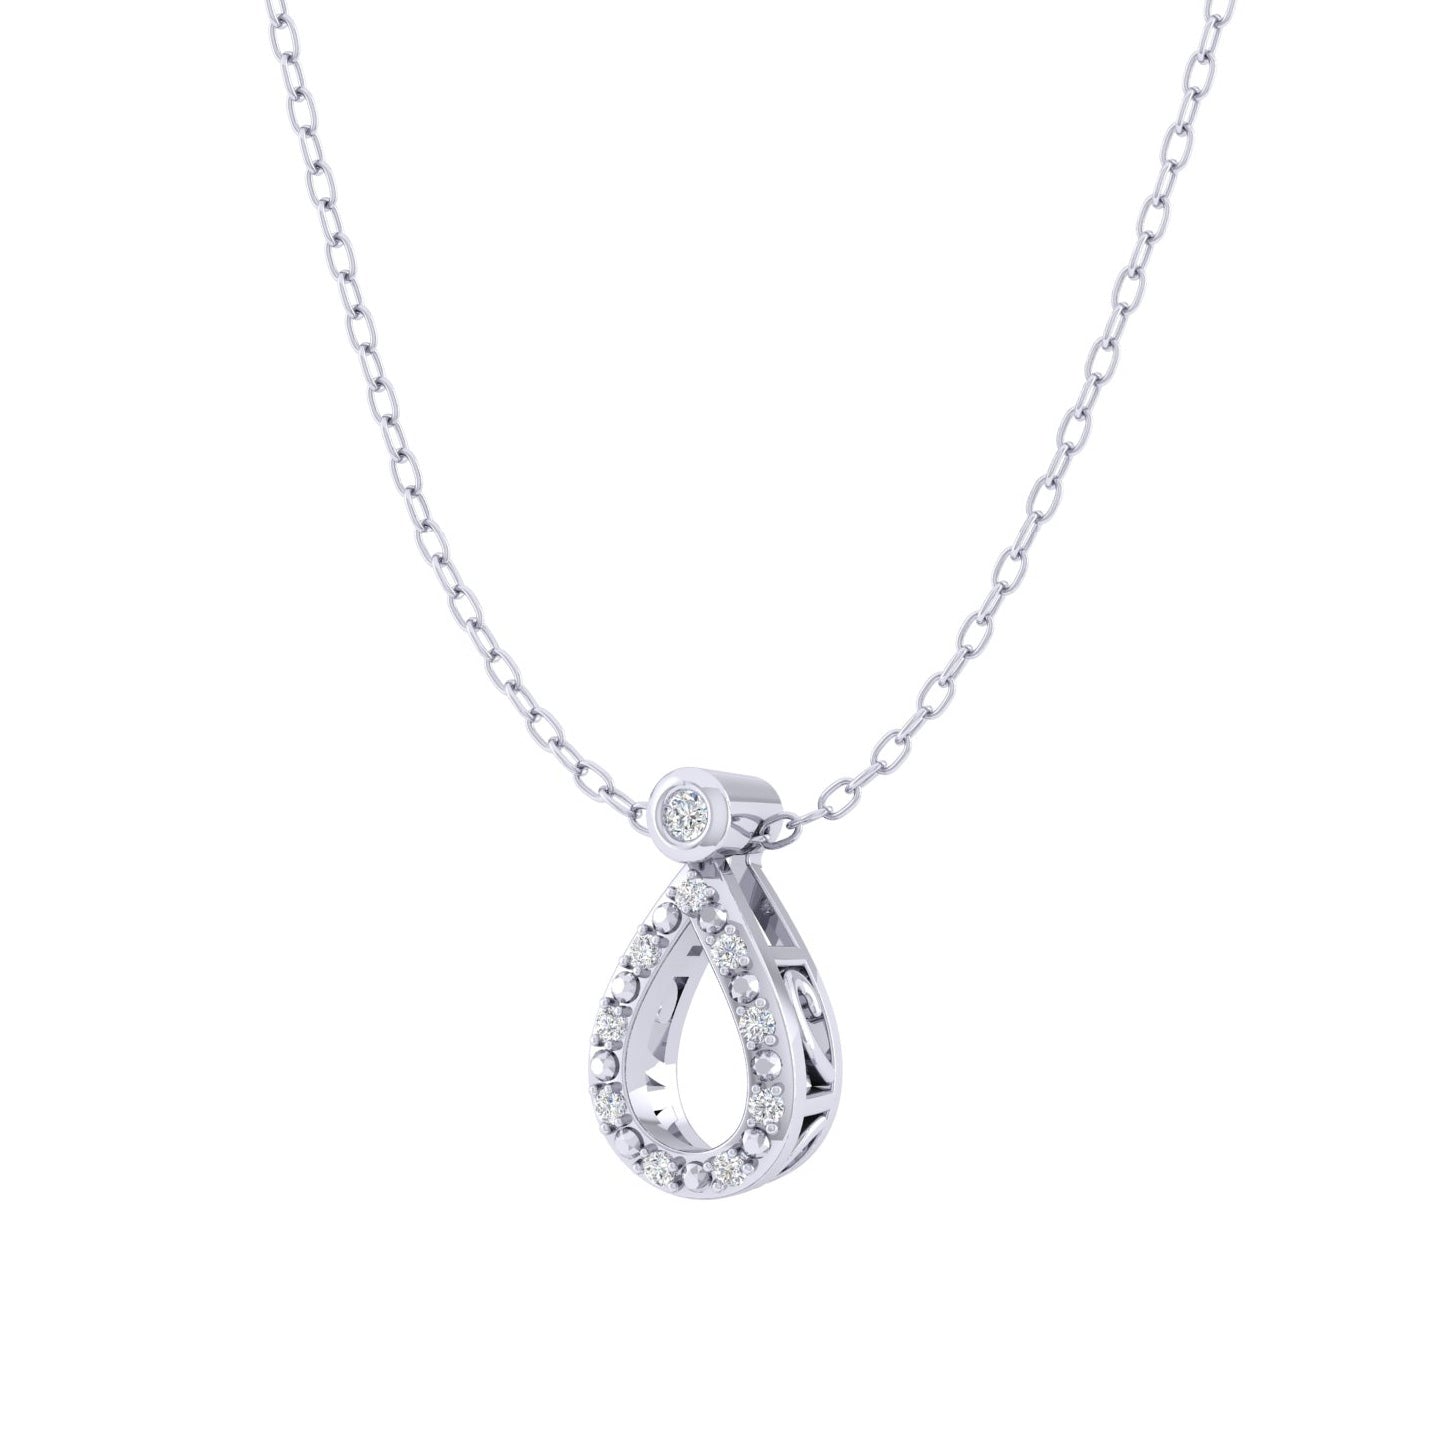 TearDrop 1/20 Cttw Natural Diamond Pendant Necklace set in 925 Sterling Silver jewelry gift